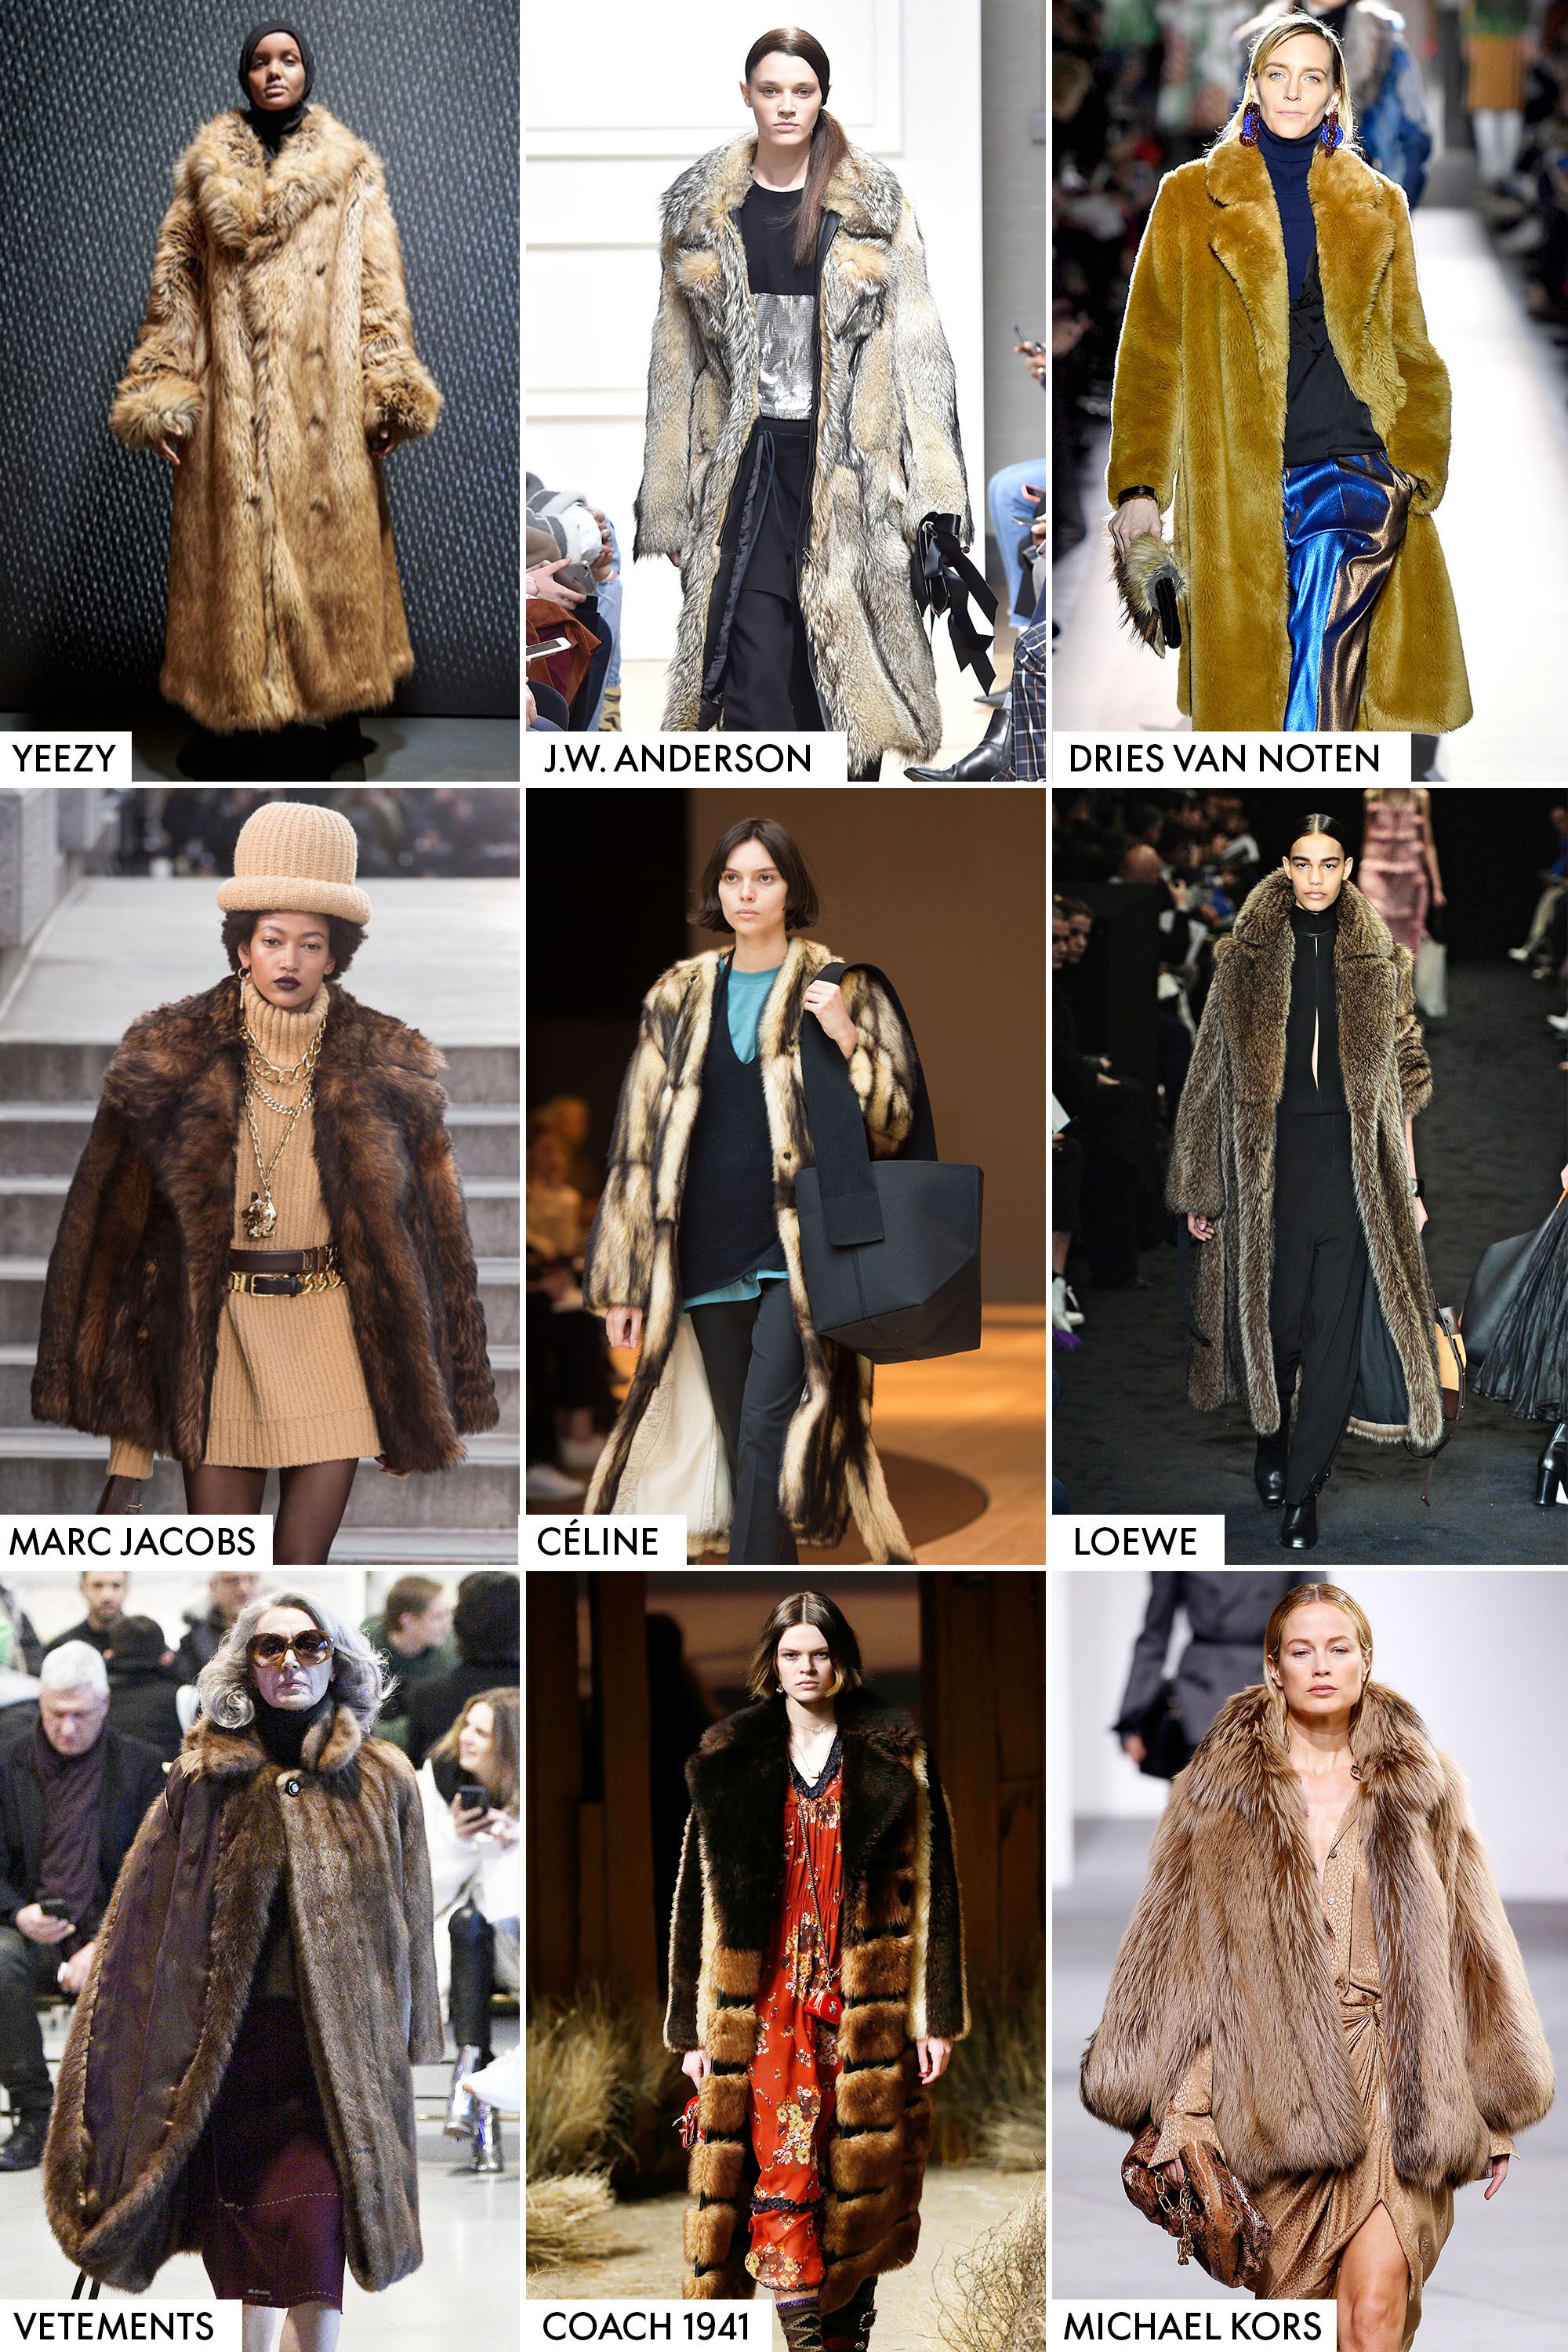 Fall 2017 Fashion Trends - Guide to Fall 2017 Styles and Runway Trends